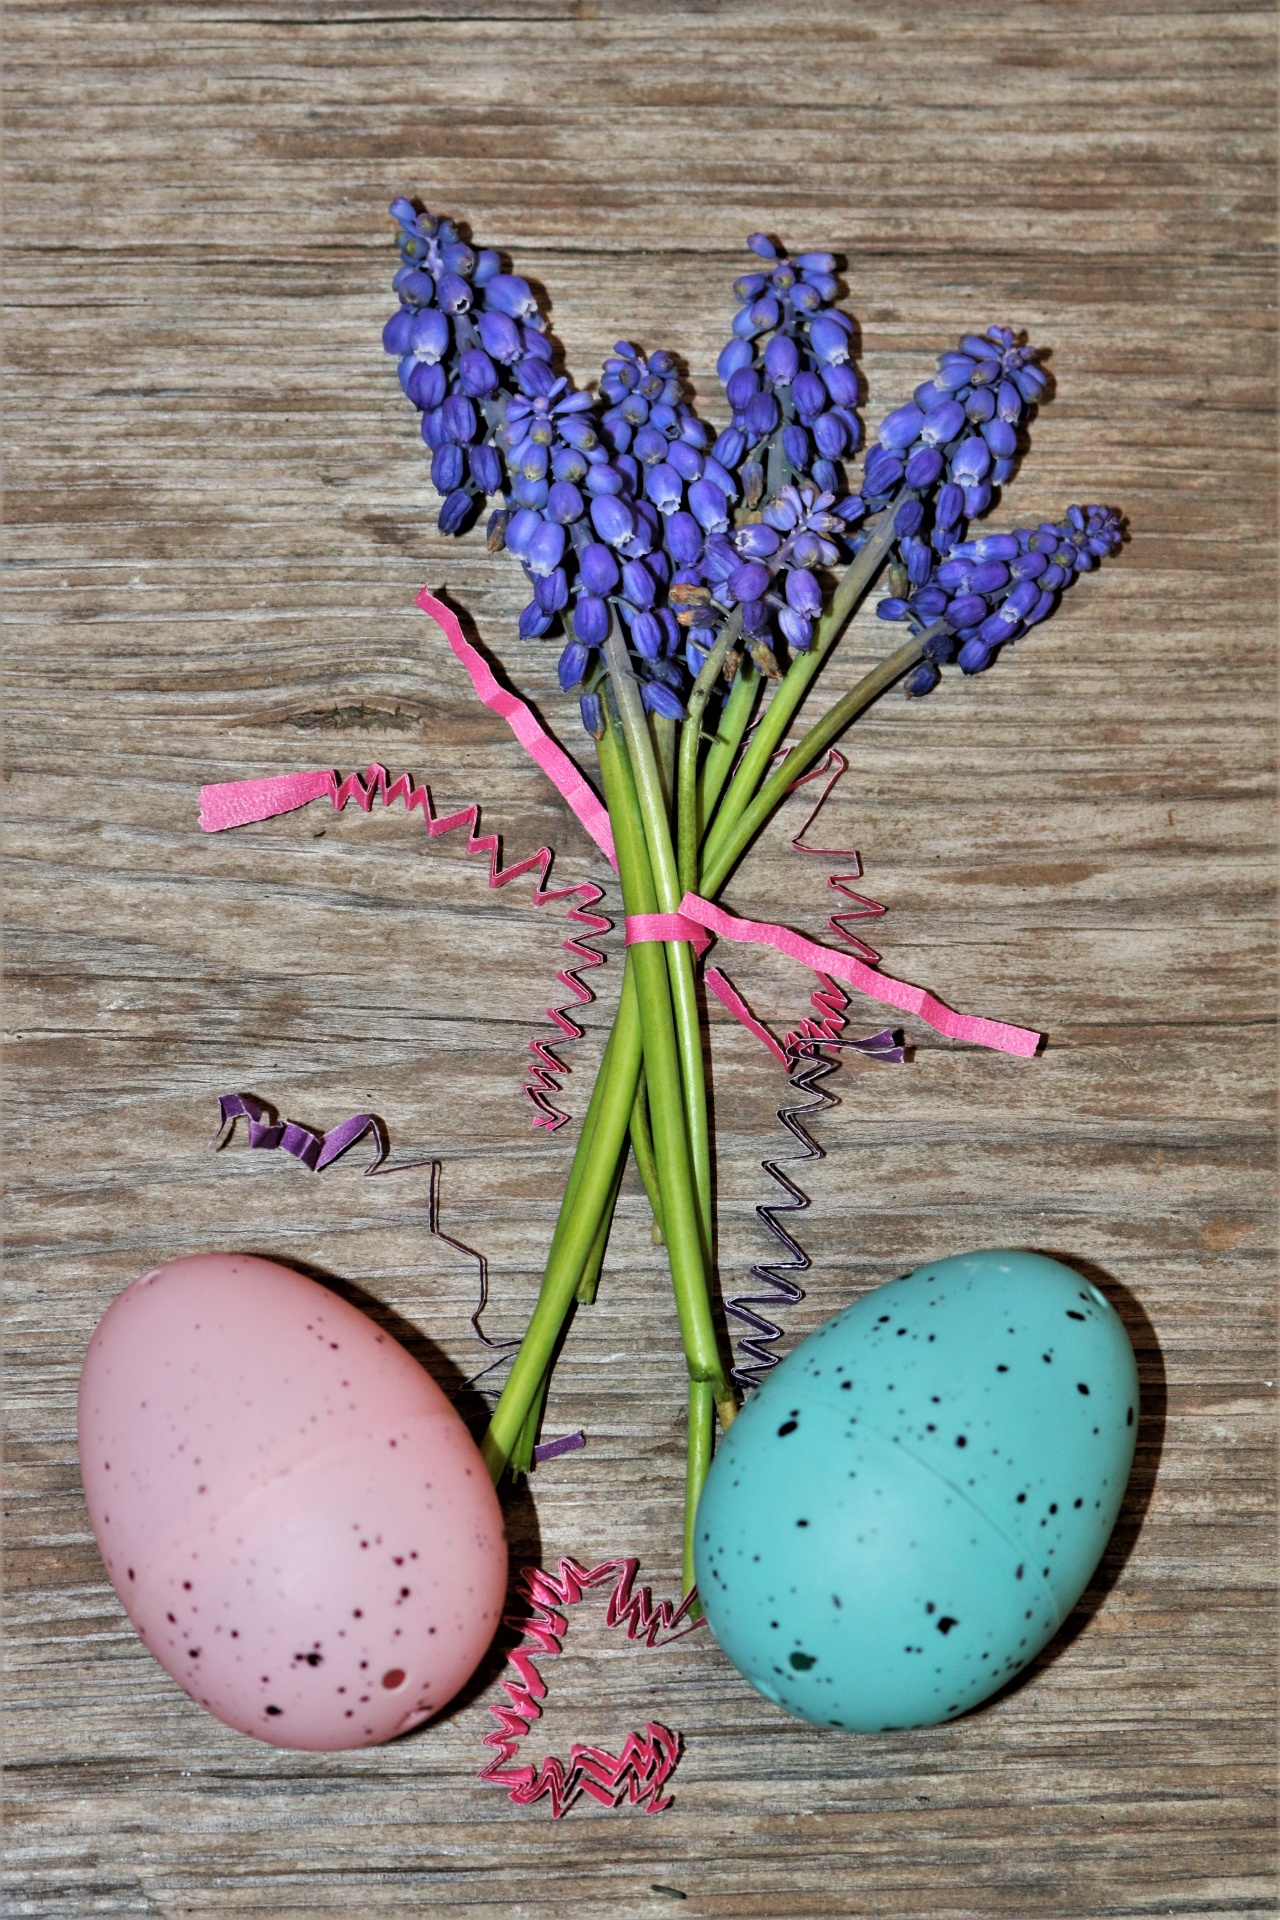 Two colorful speckled Easter eggs and a bunch of blue muscari flowers, on a wood grain background.